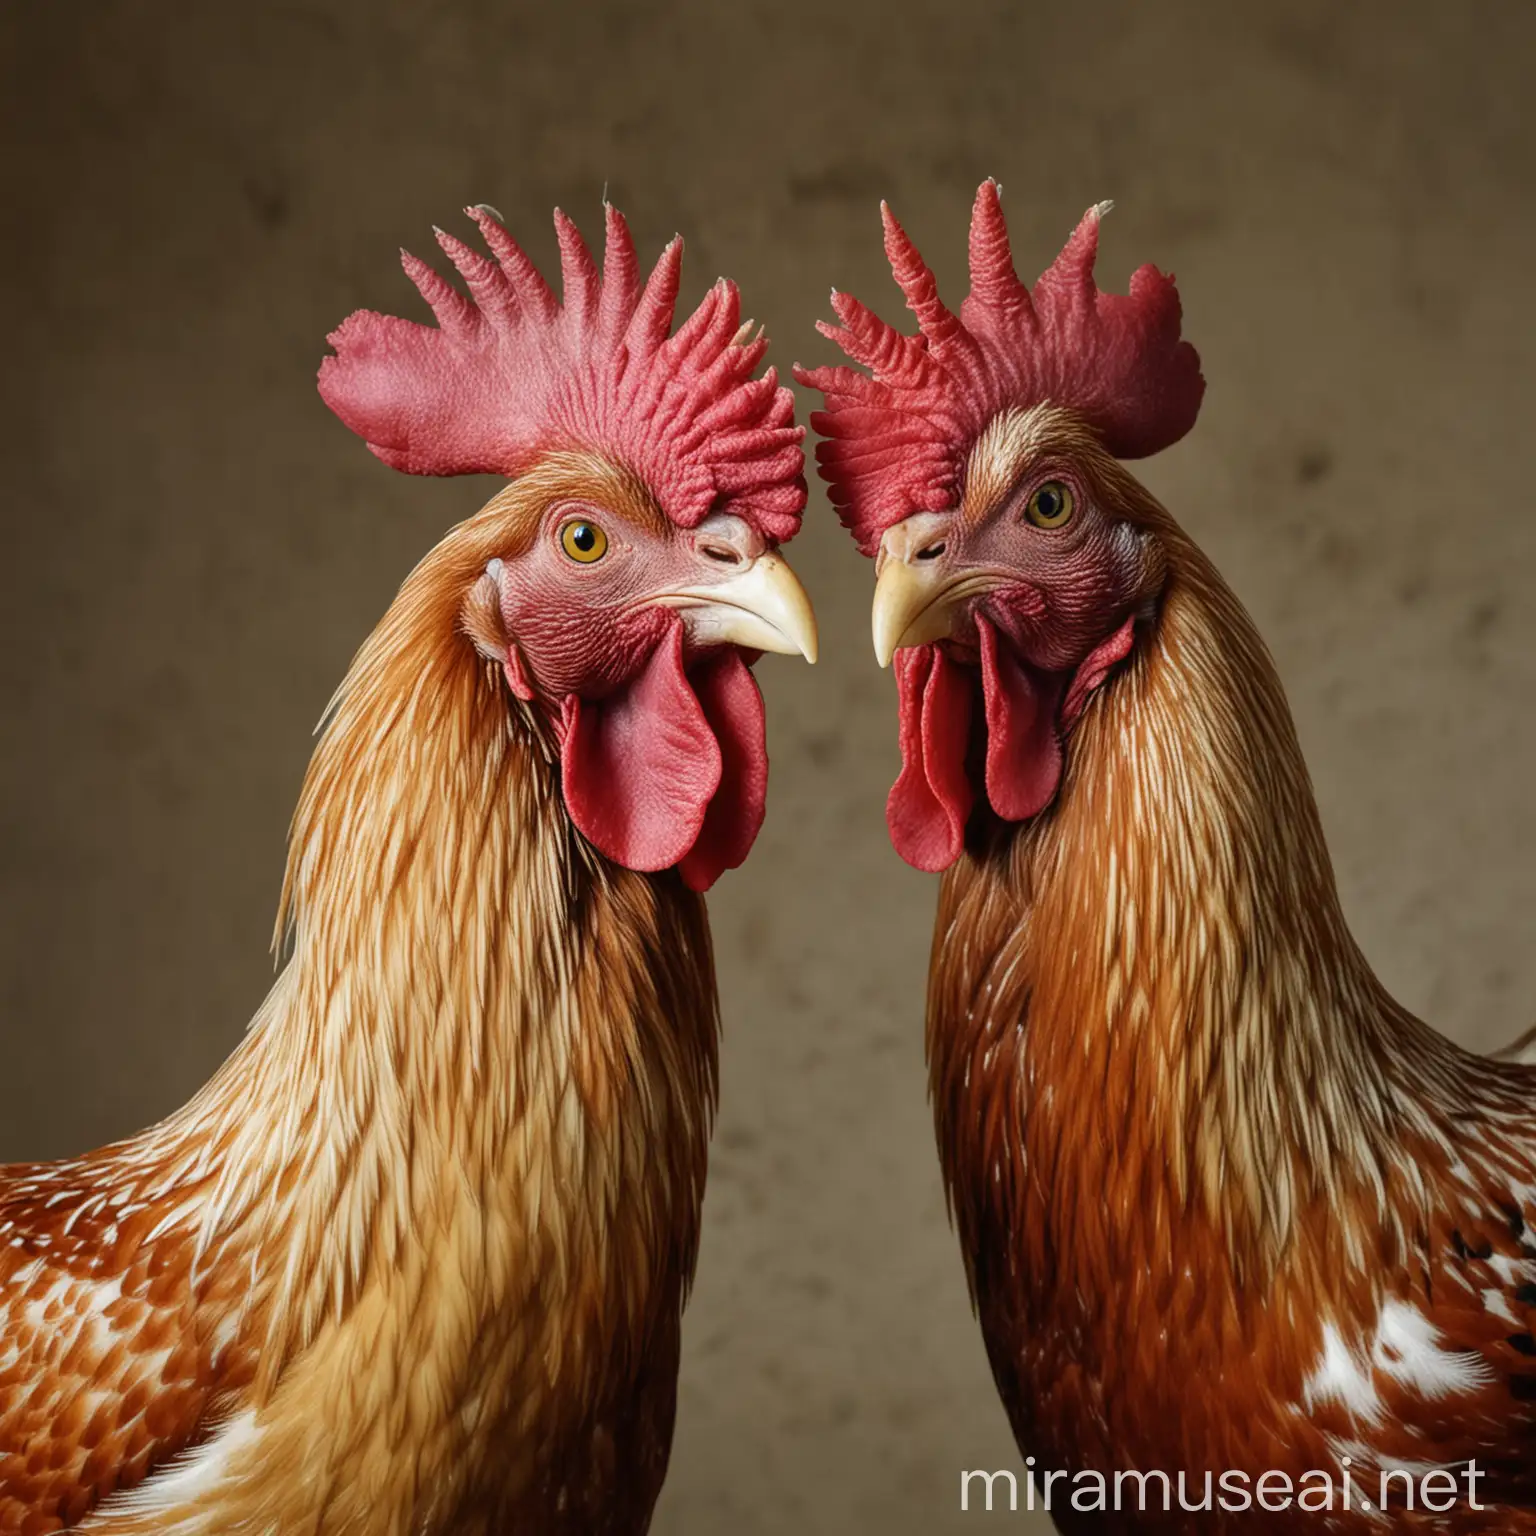 TwoHeaded Rooster on a Farm